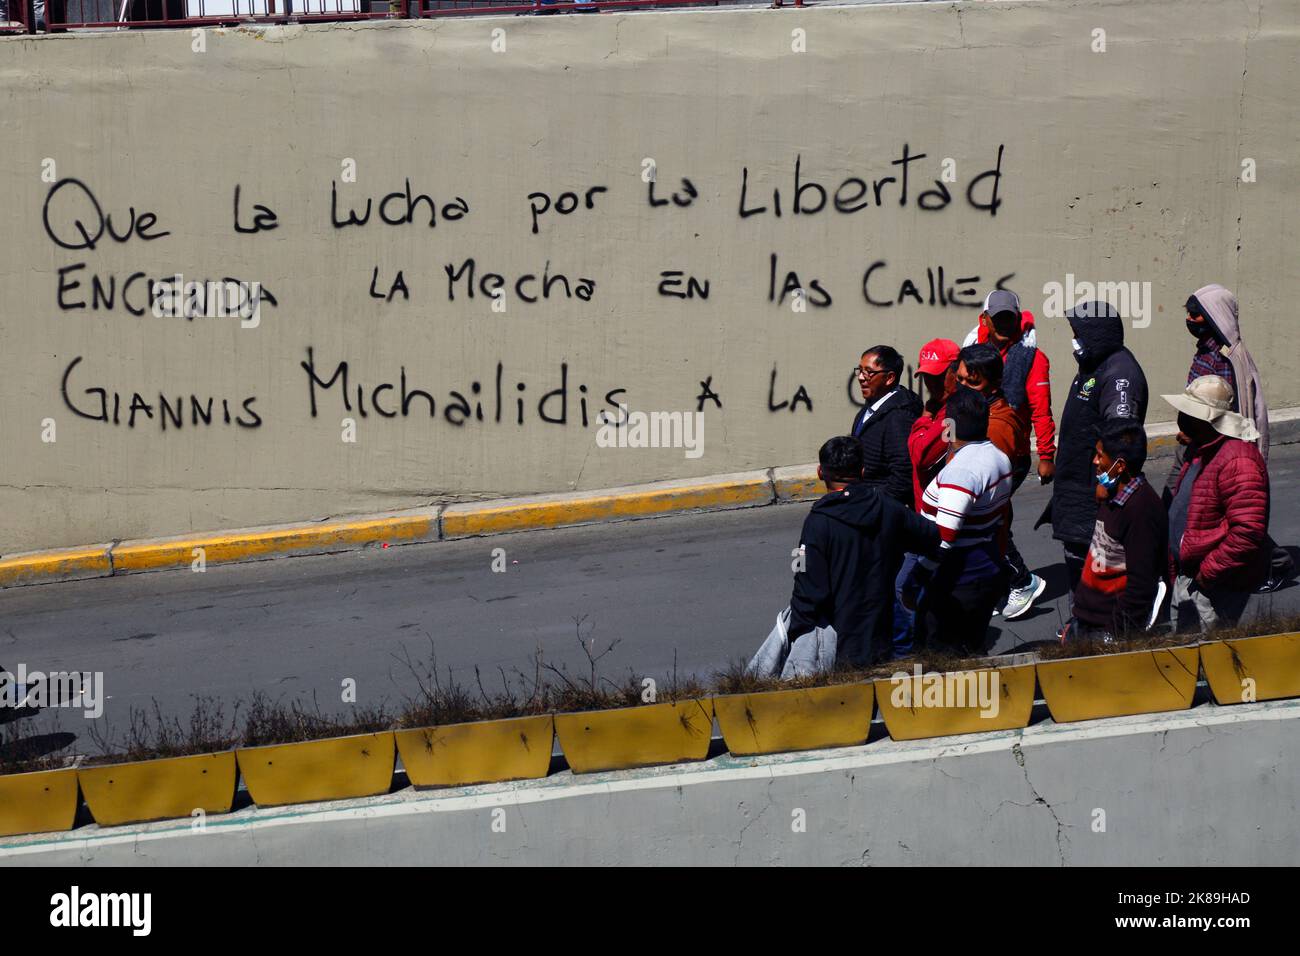 Protesters march pass graffiti in support of Giannis Michailidis, a prisoner in Greece who was on a hunger strike in May-July 2022, La Paz, Bolivia Stock Photo